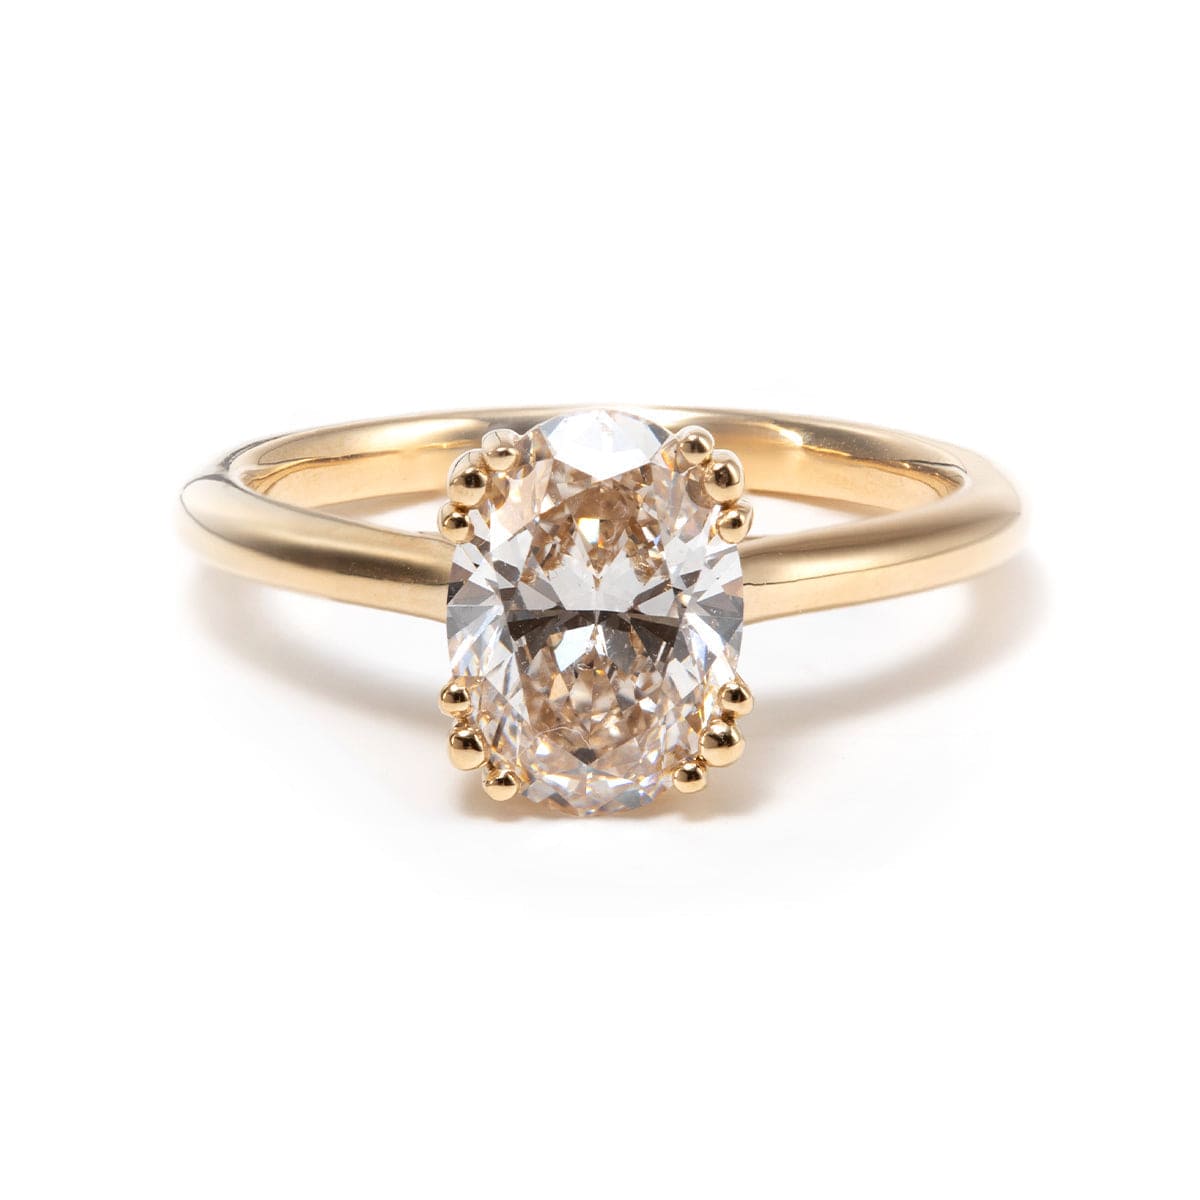 10k Gold Diamond Three-pronged Solitaire Ring (Ring Setting Only)